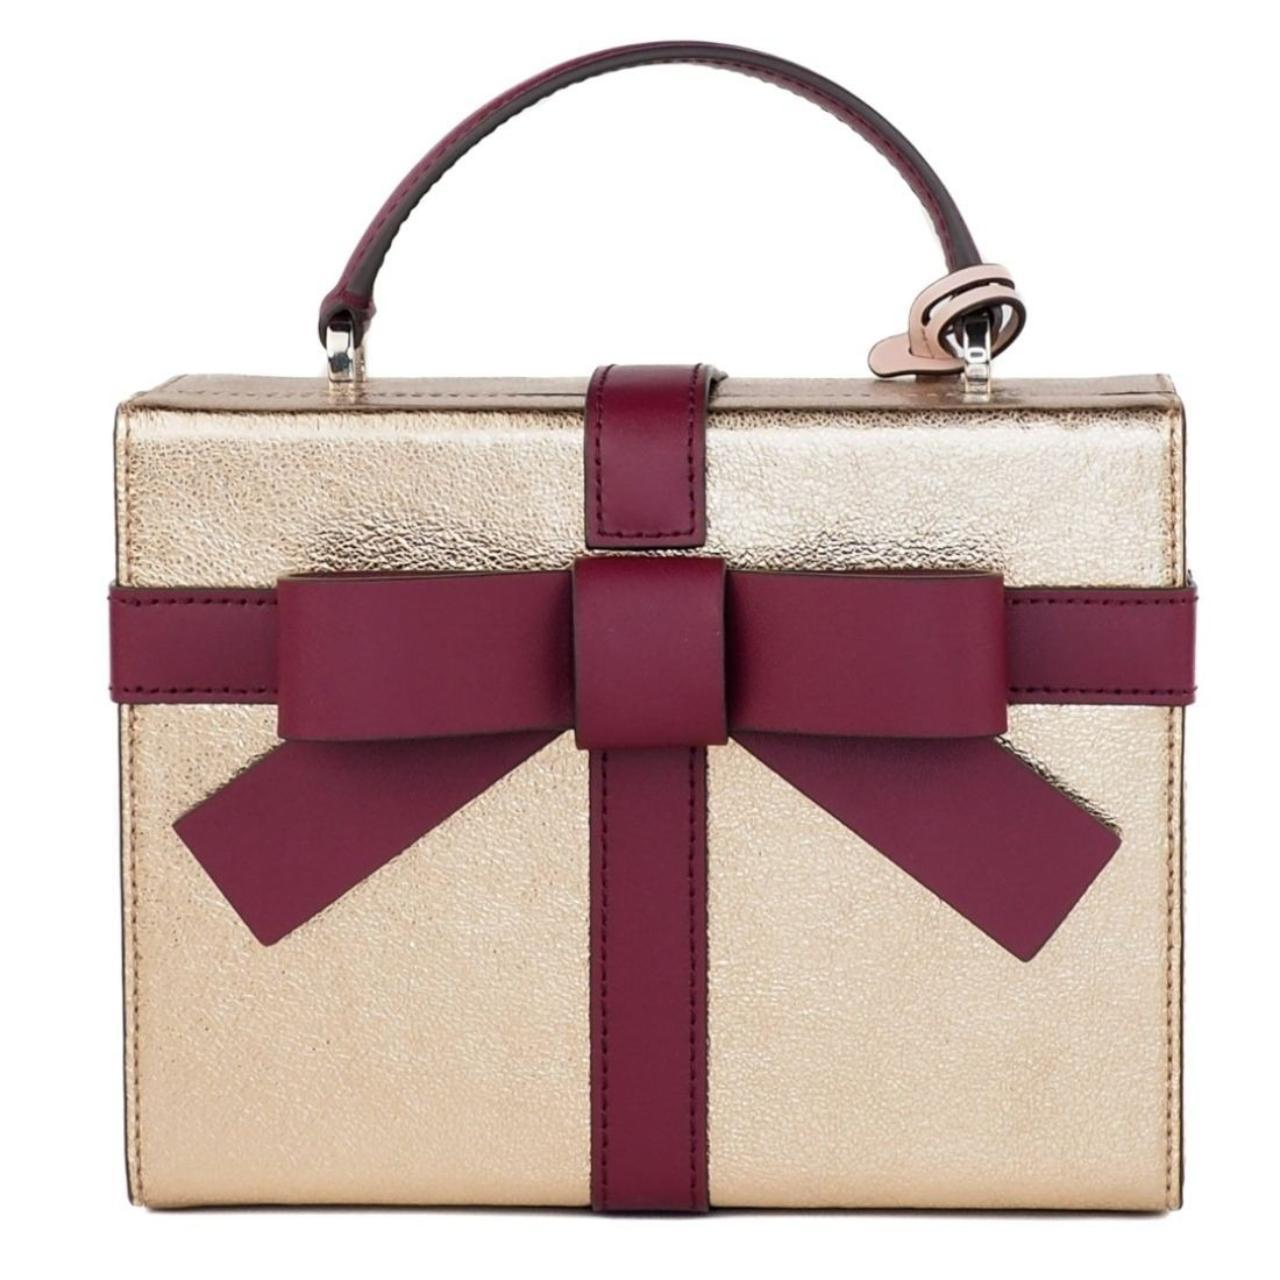 Kate Spade New York Wrapping Party Gift Box Crossbody Women's